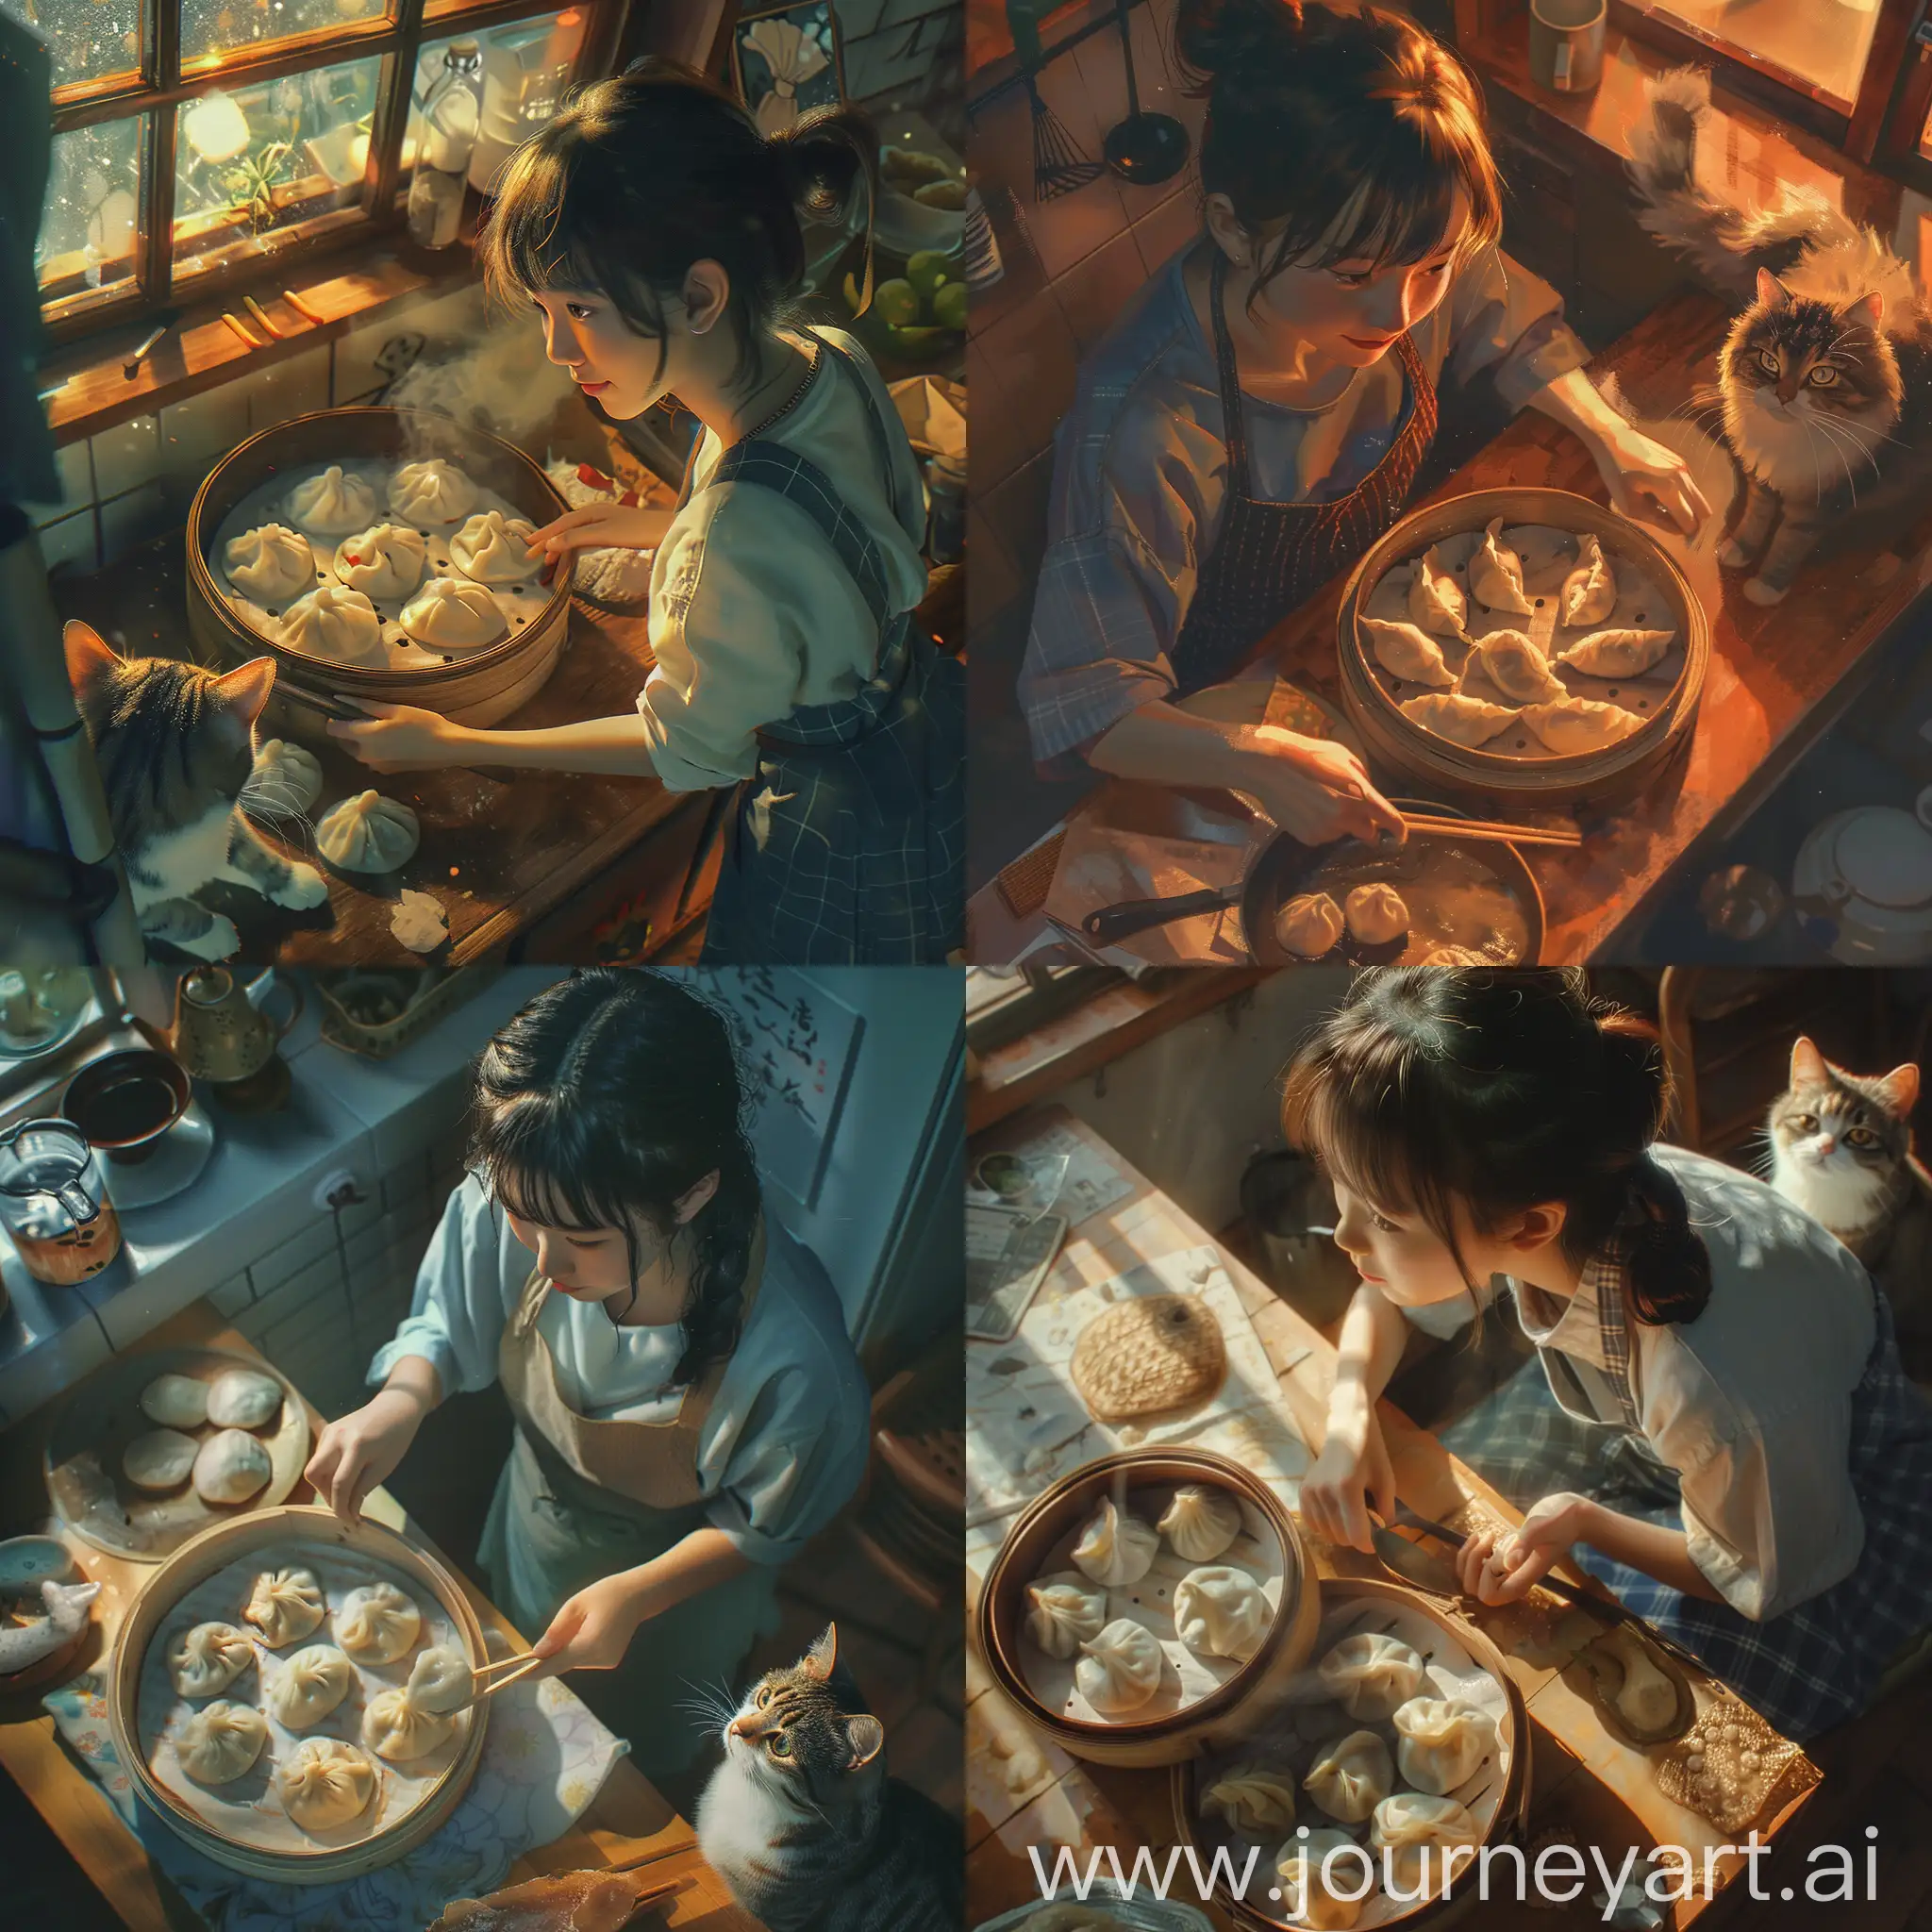 Young-Woman-Crafting-Japanese-Dumplings-with-Feline-Companion